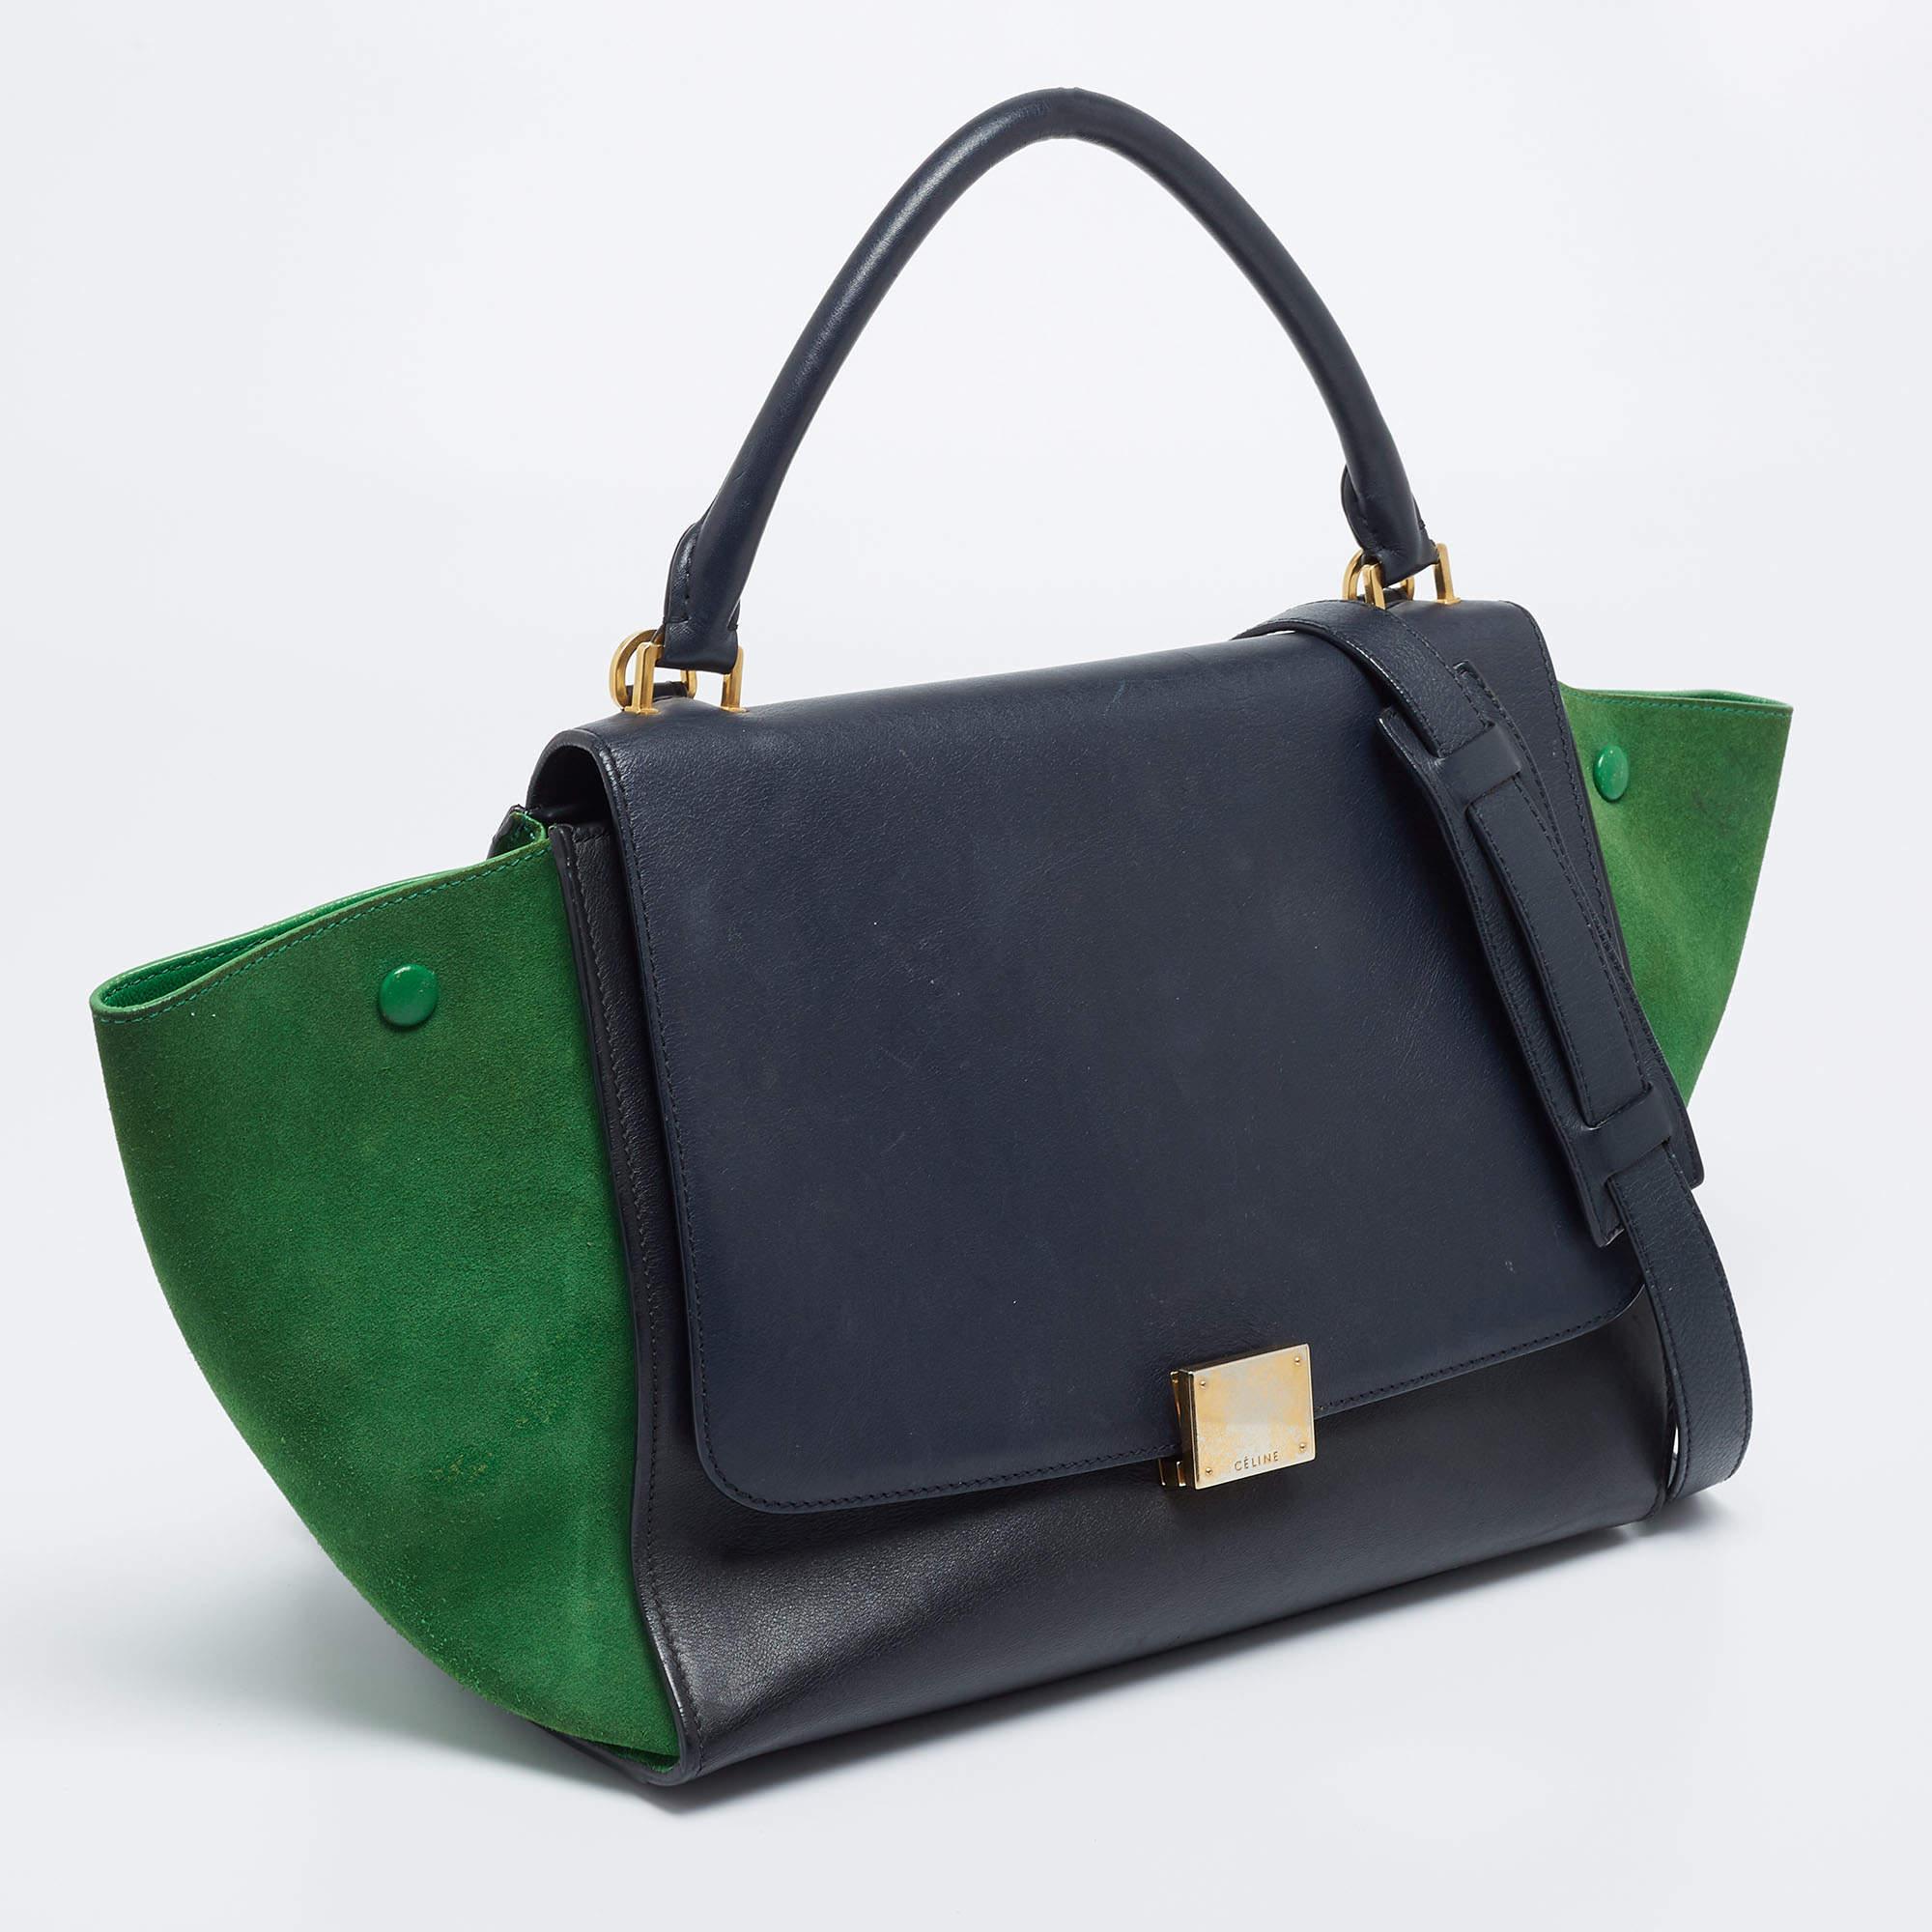 In every stride, swing, and twirl, this beautiful Celine bag will stand out. Crafted from leather and suede in Italy, the bag is designed with signature flappy wings and a flap that reveals a spacious leather interior. A top handle and a bag strap